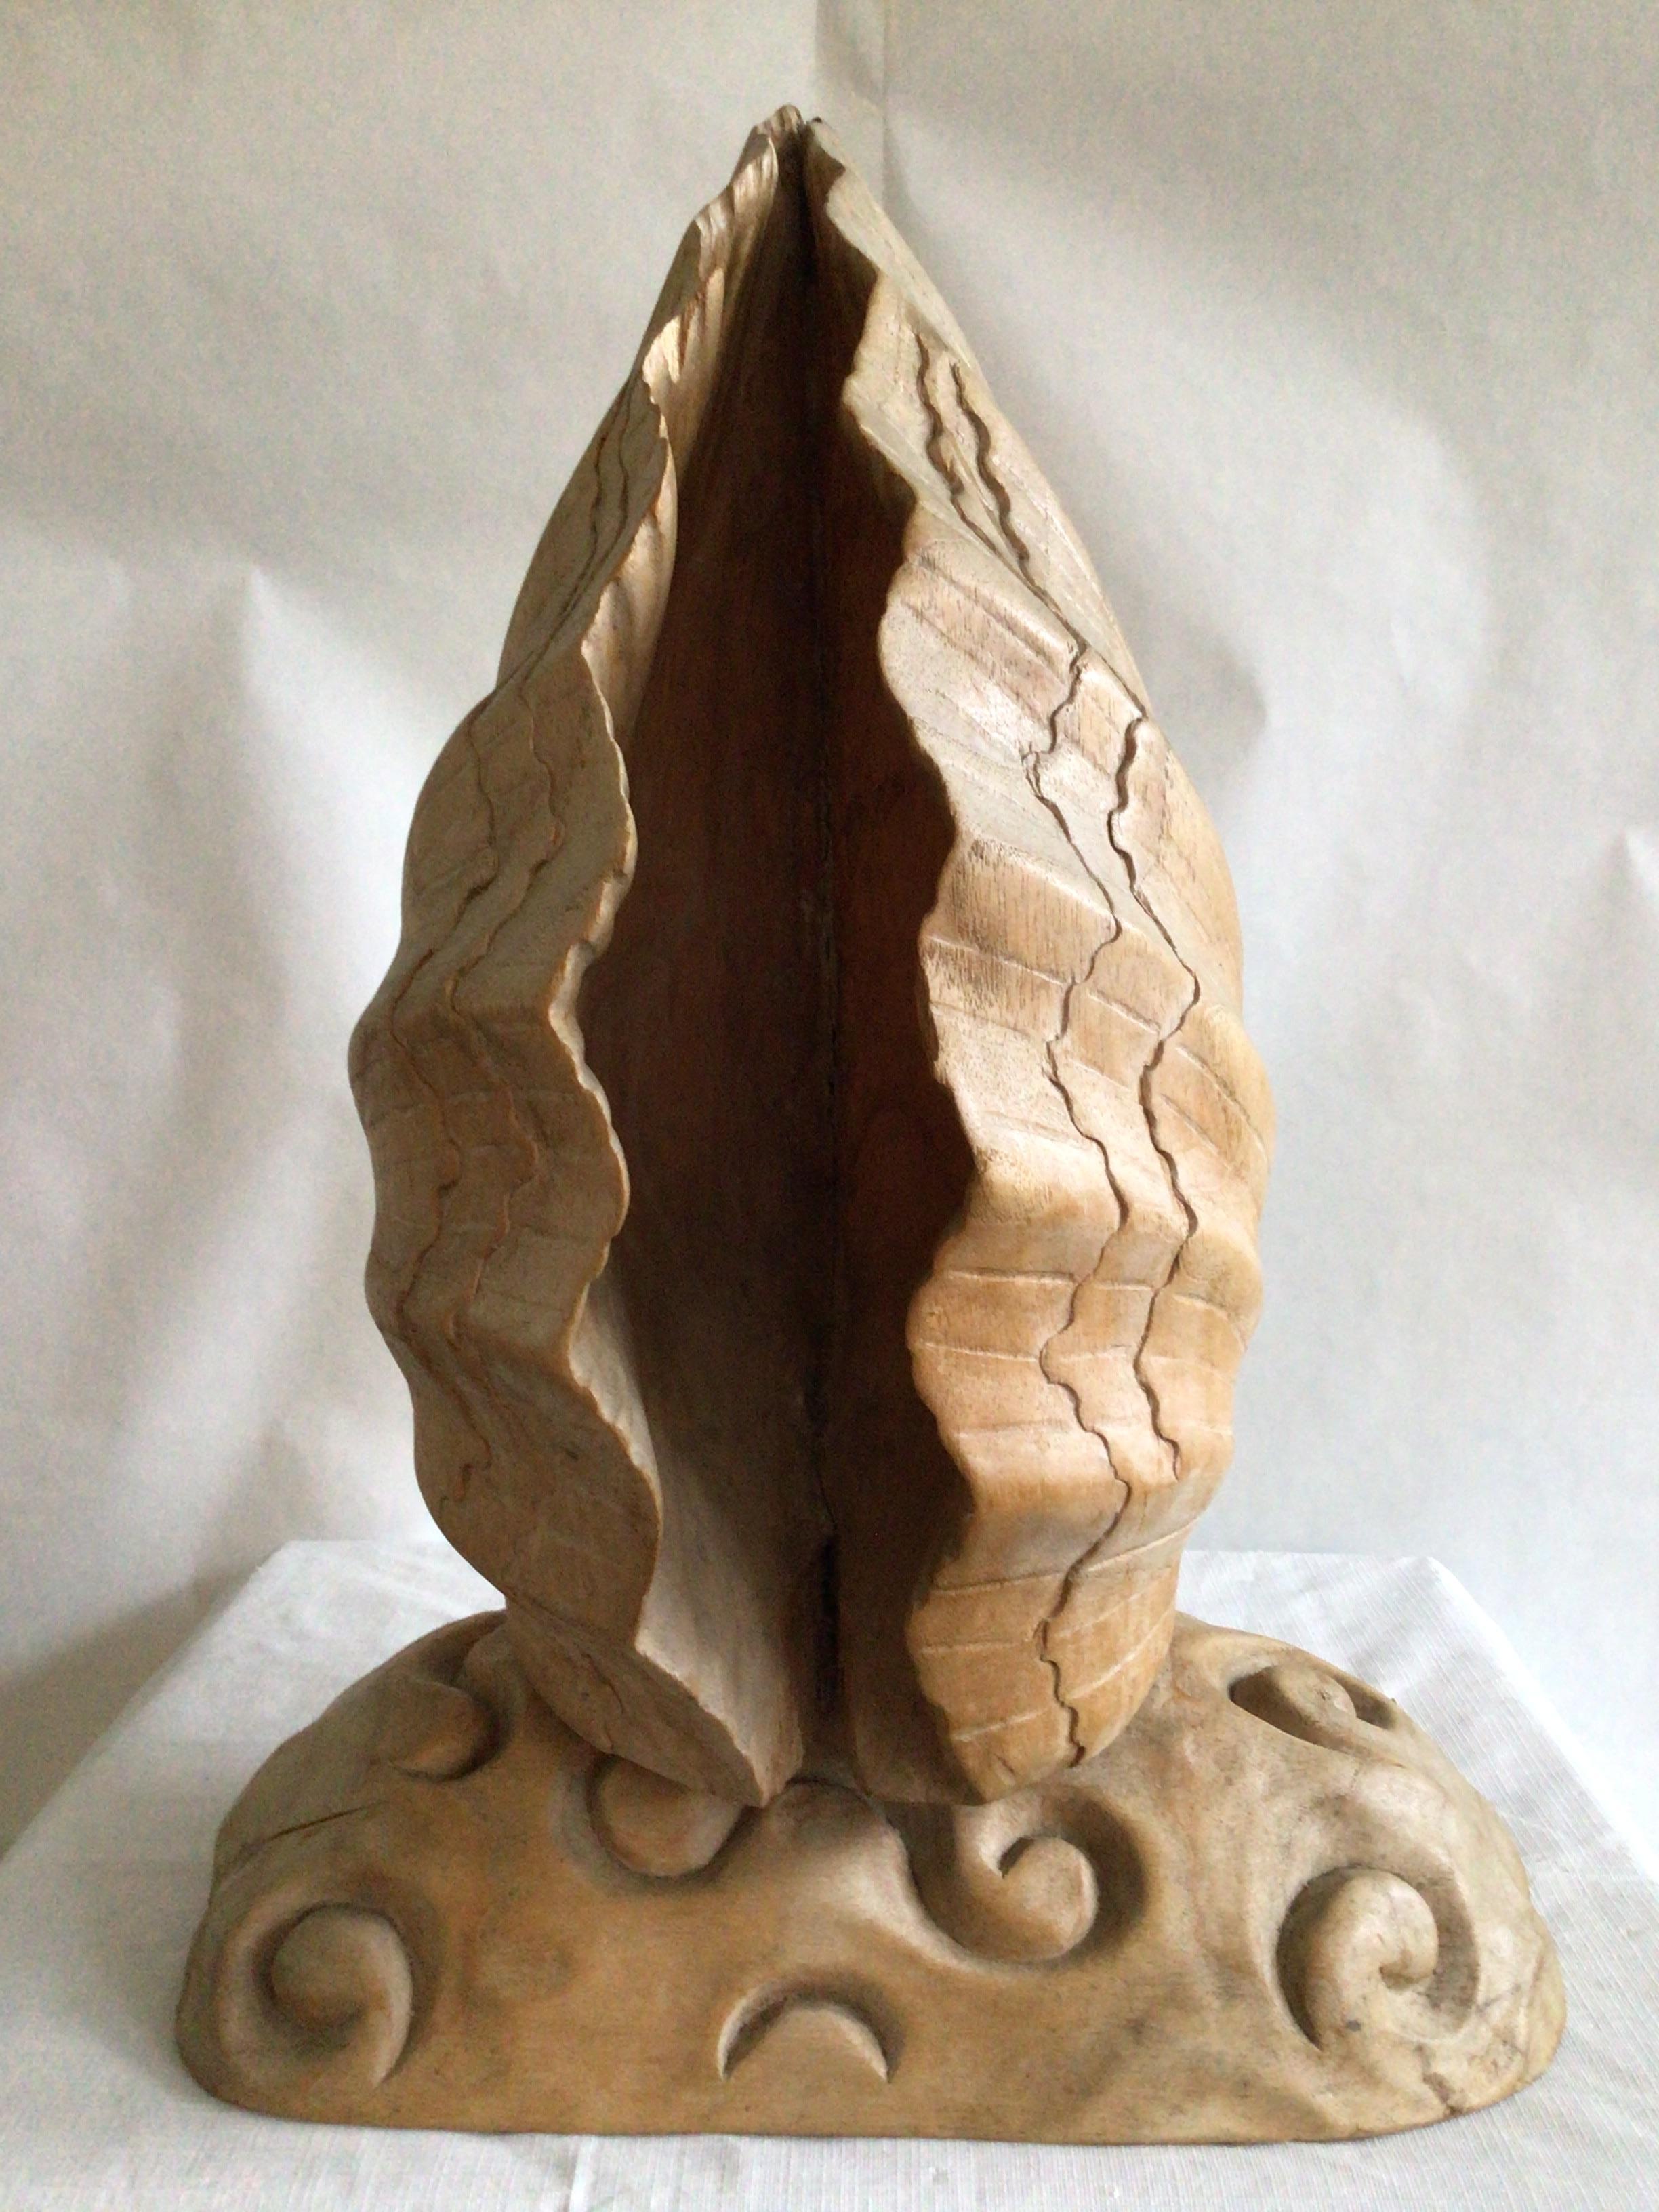 1950s Italian Carved Wood Folded Leaf or Shell Sculpture on Wood Base
Spirals carved in base
Carved Scalloped Edges
Light brown, tan, peaches, and cream colors
Italy carved on underside of base (as pictured)

